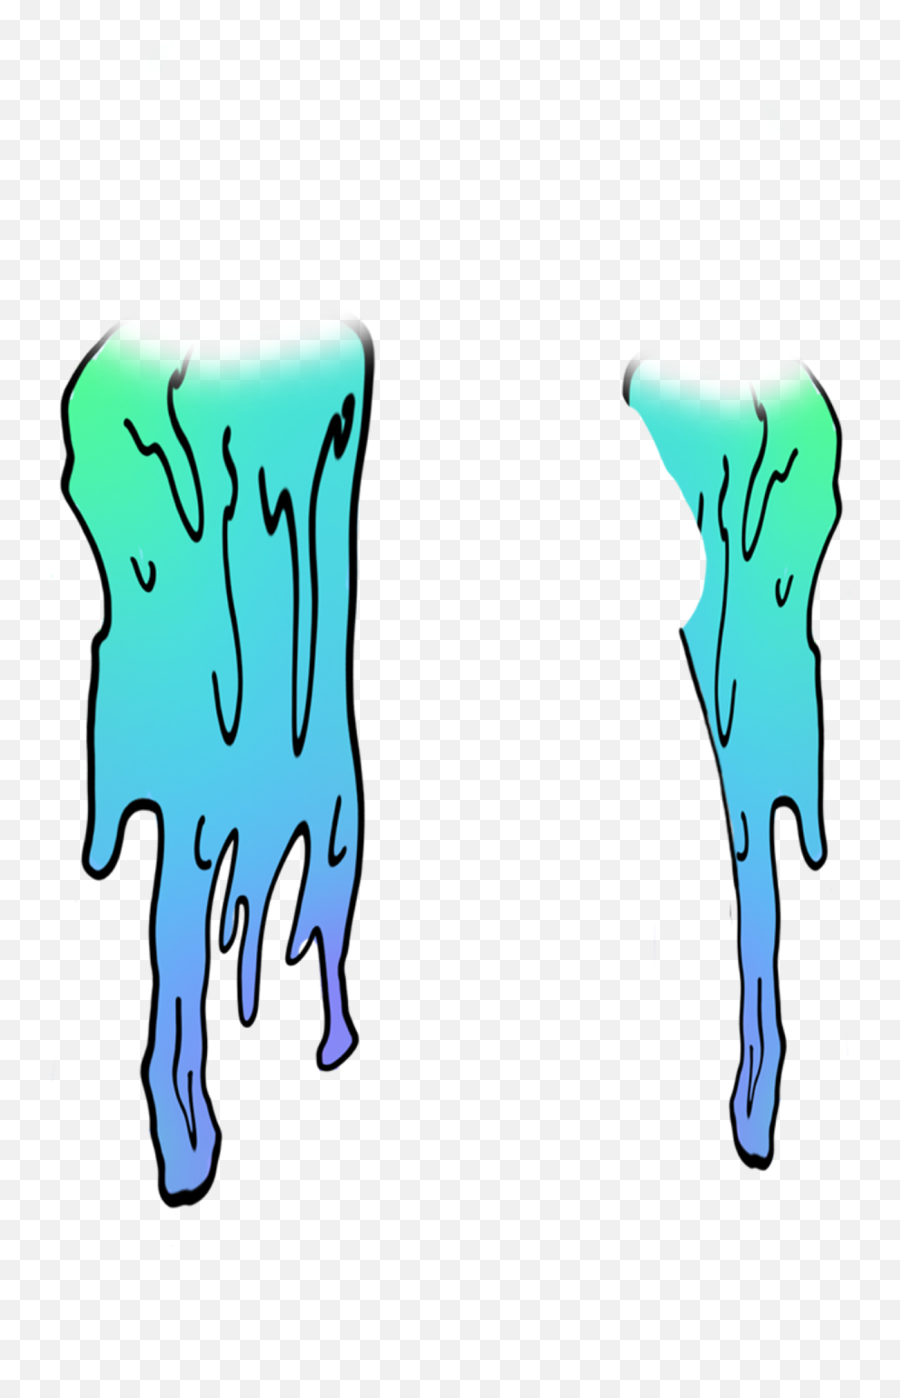 Download Slime Drips Dripping Drip - Transparent Drip Slime Emoji,Drip Png